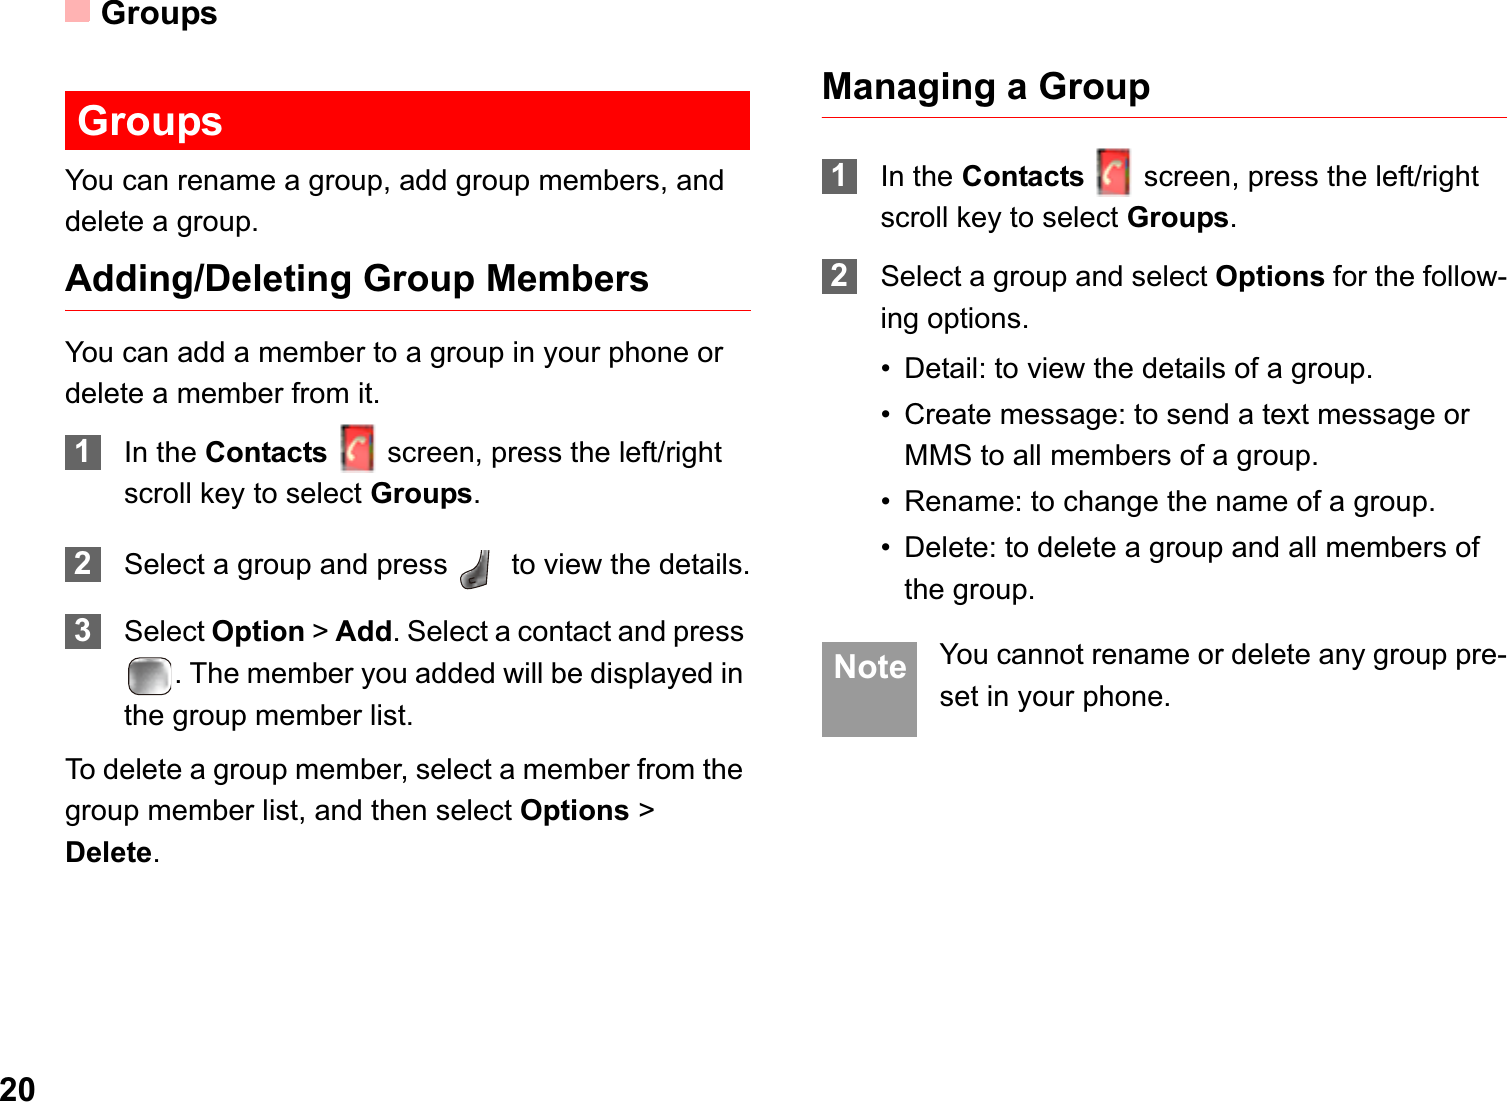 Groups20GroupsYou can rename a group, add group members, and delete a group.Adding/Deleting Group MembersYou can add a member to a group in your phone or delete a member from it.1In the Contacts screen, press the left/right scroll key to select Groups.2Select a group and press   to view the details.3Select Option &gt;Add. Select a contact and press . The member you added will be displayed in the group member list.To delete a group member, select a member from the group member list, and then select Options &gt; Delete.Managing a Group1In the Contacts screen, press the left/right scroll key to select Groups.2Select a group and select Options for the follow-ing options.• Detail: to view the details of a group.• Create message: to send a text message or MMS to all members of a group.• Rename: to change the name of a group.• Delete: to delete a group and all members of the group. Note You cannot rename or delete any group pre-set in your phone.